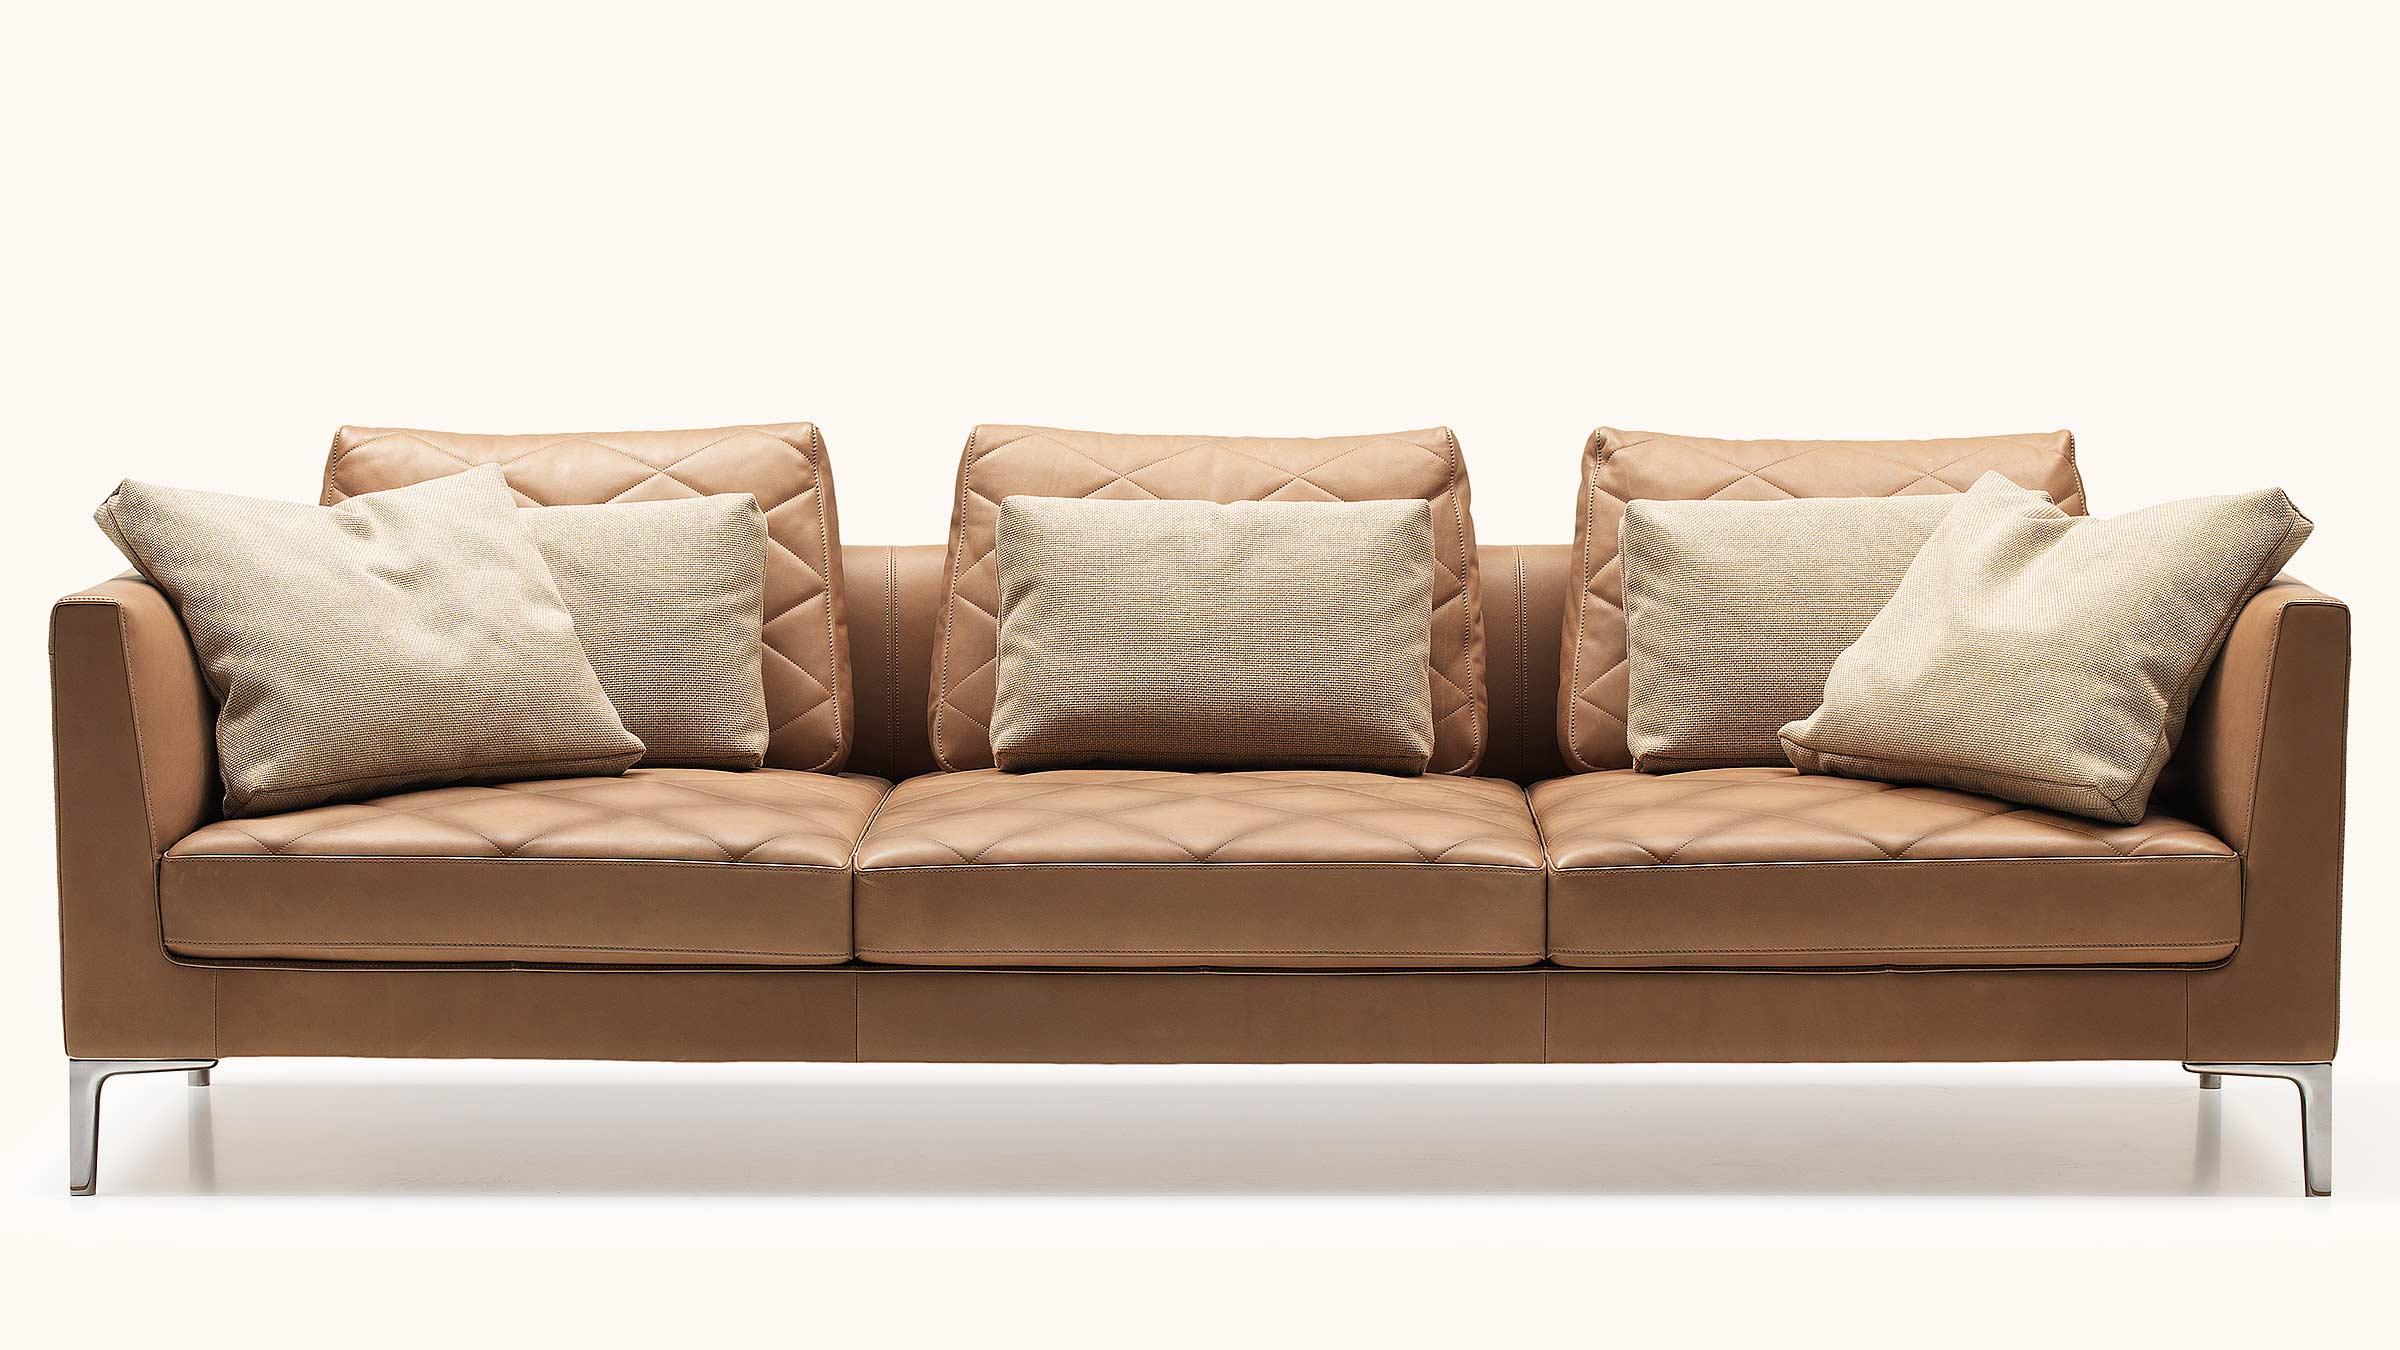 Available as a sofa, armchair, stool or récamiere, the DS-48 enables the typical De Sede seating experience, characterized by high quality and unique durability. Loose fabric cushions round off the search for time- less elegance and enable both